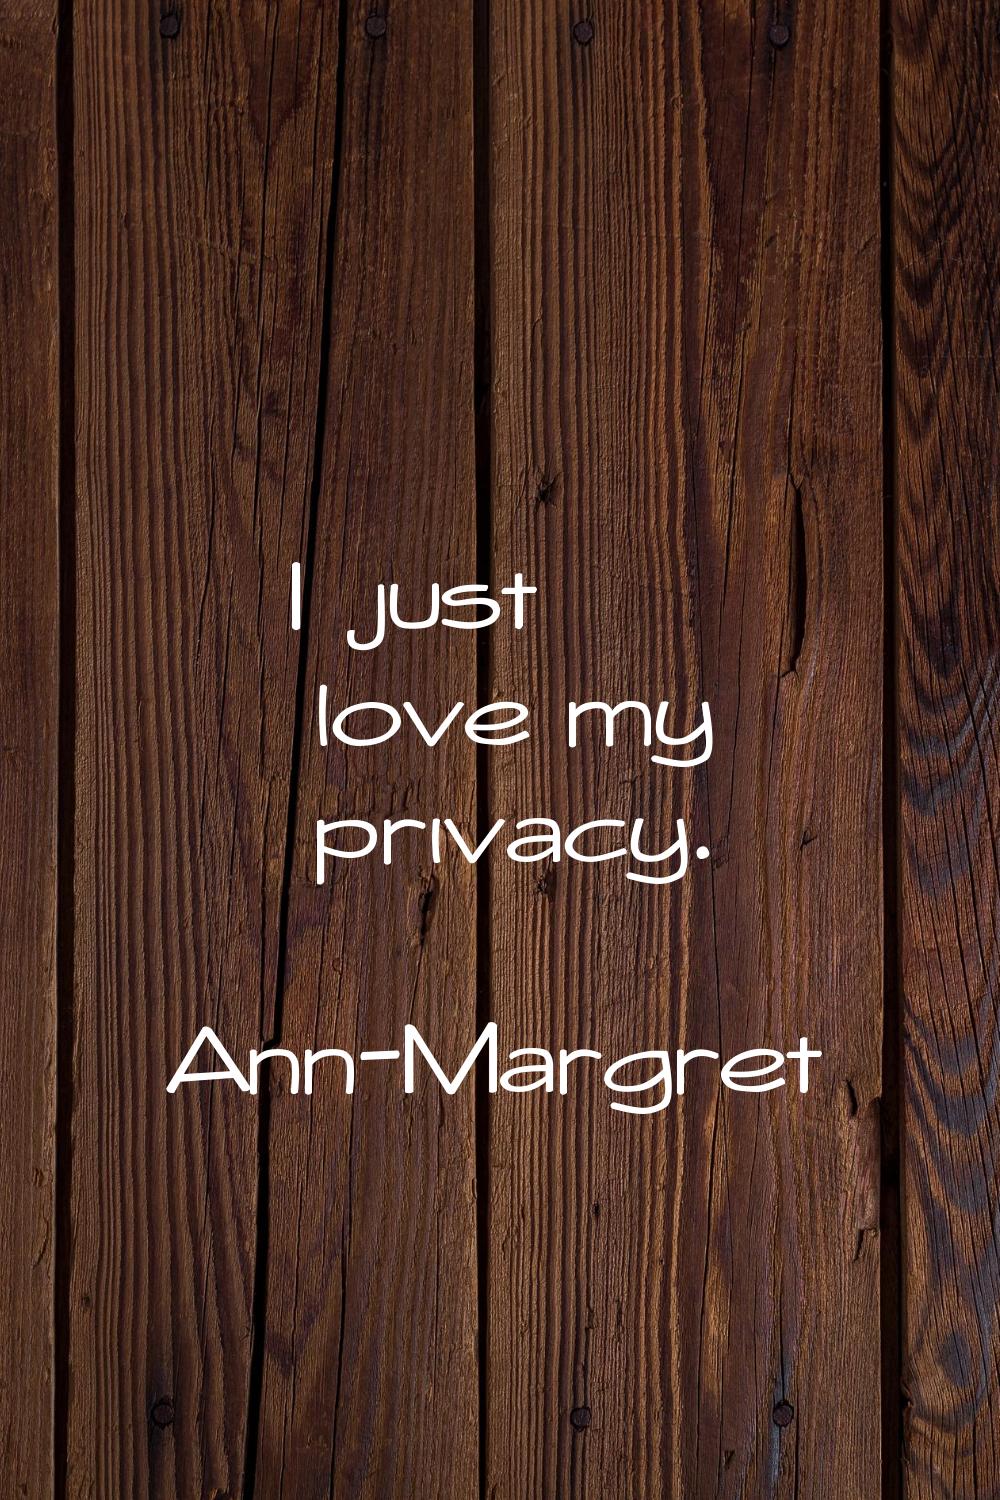 I just love my privacy.